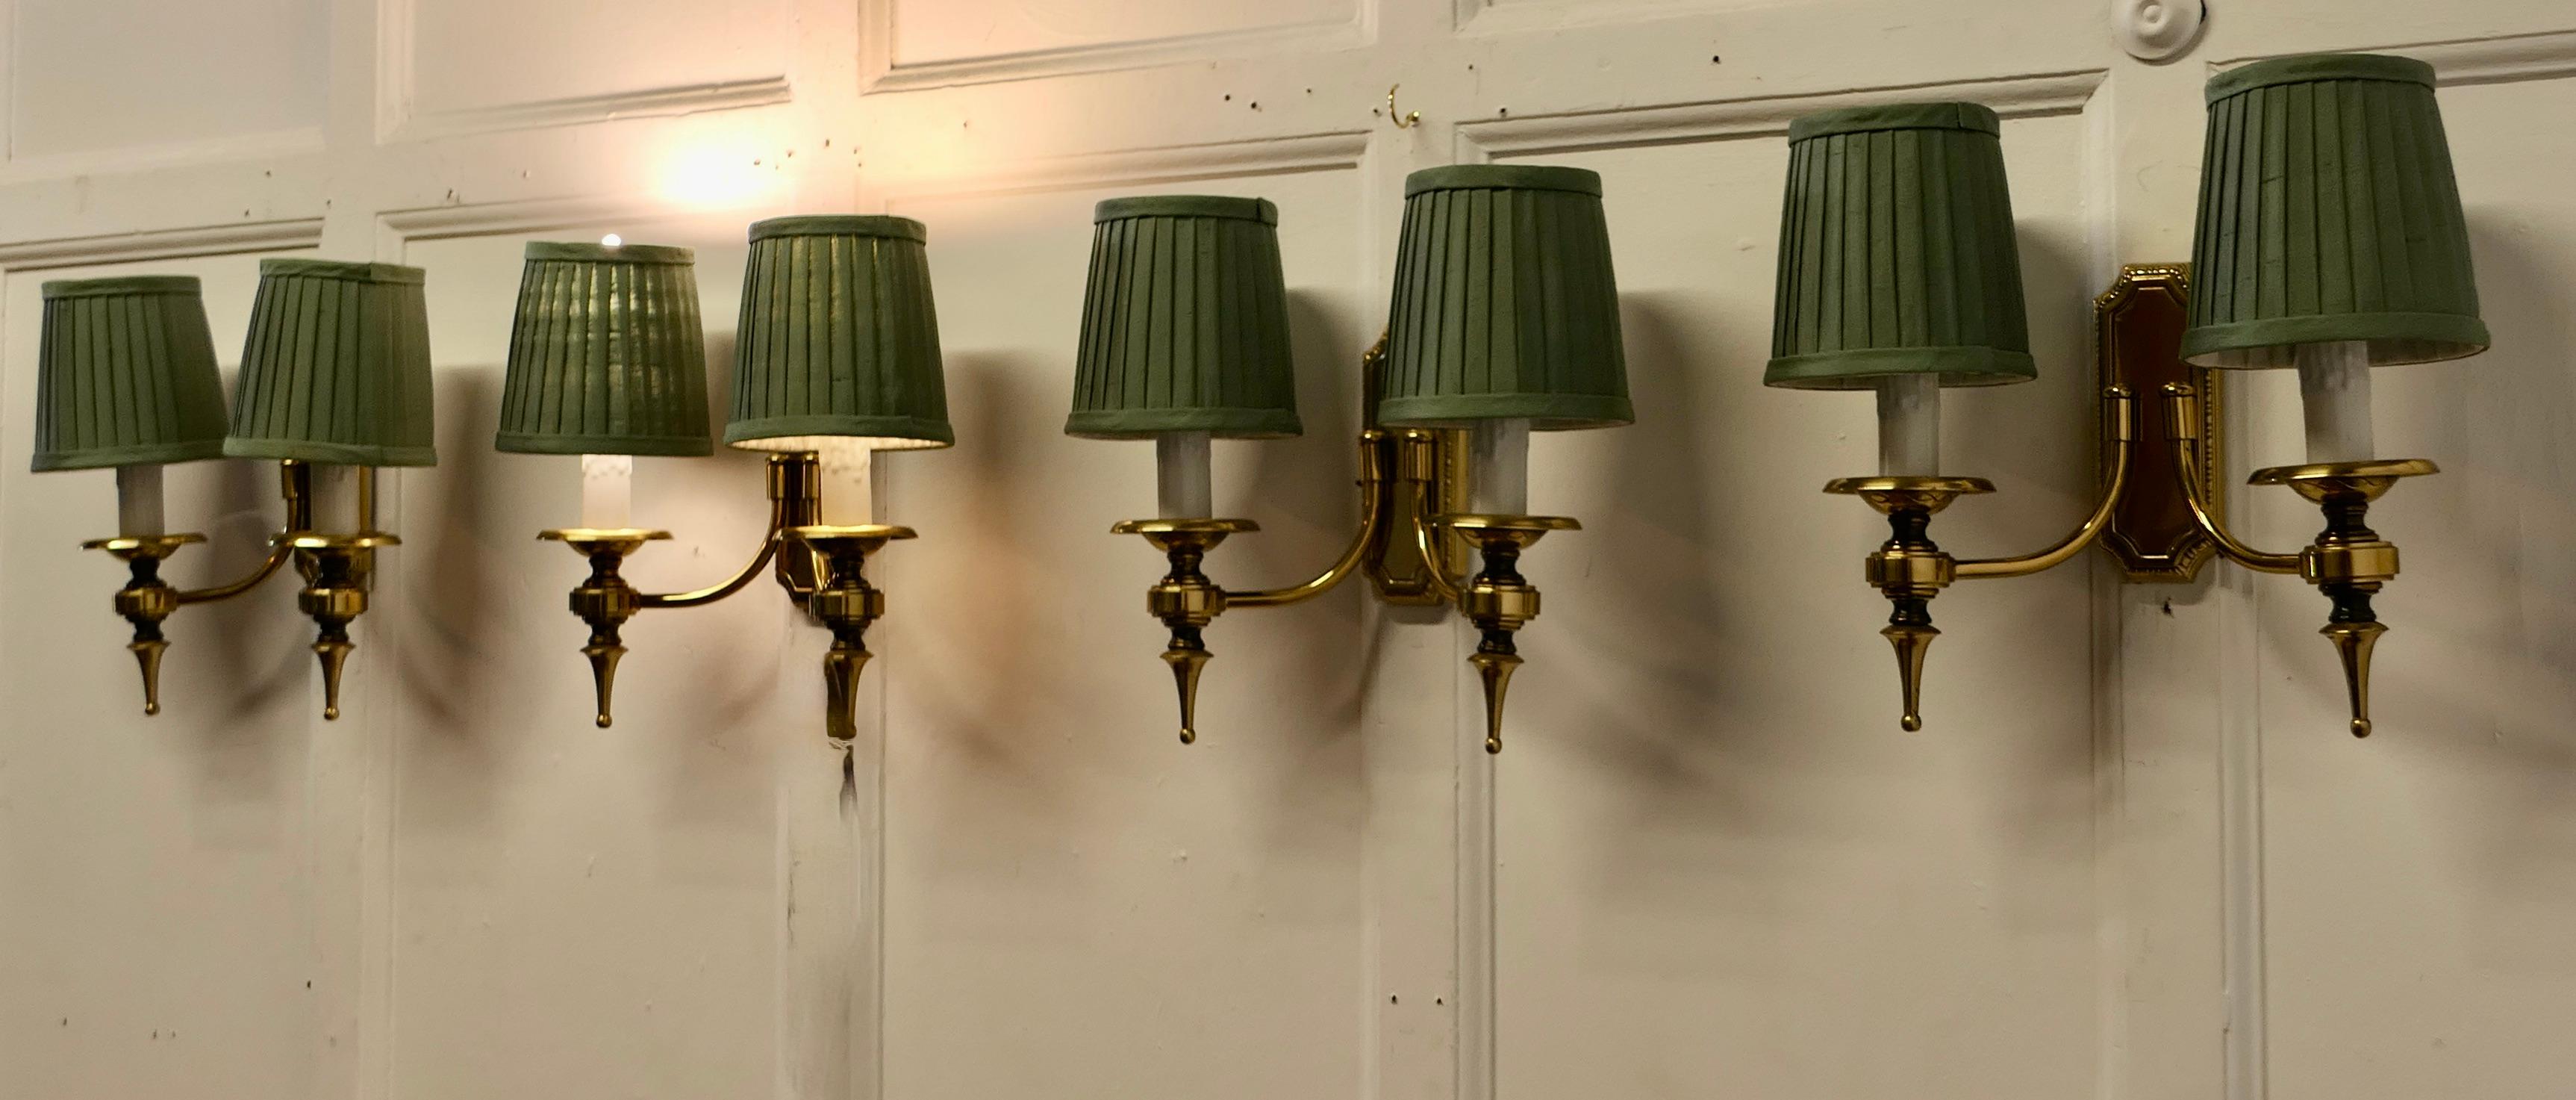 A Set of 4 Twin Wall Lights  A very handsome set of 4 double wall lights  For Sale 2